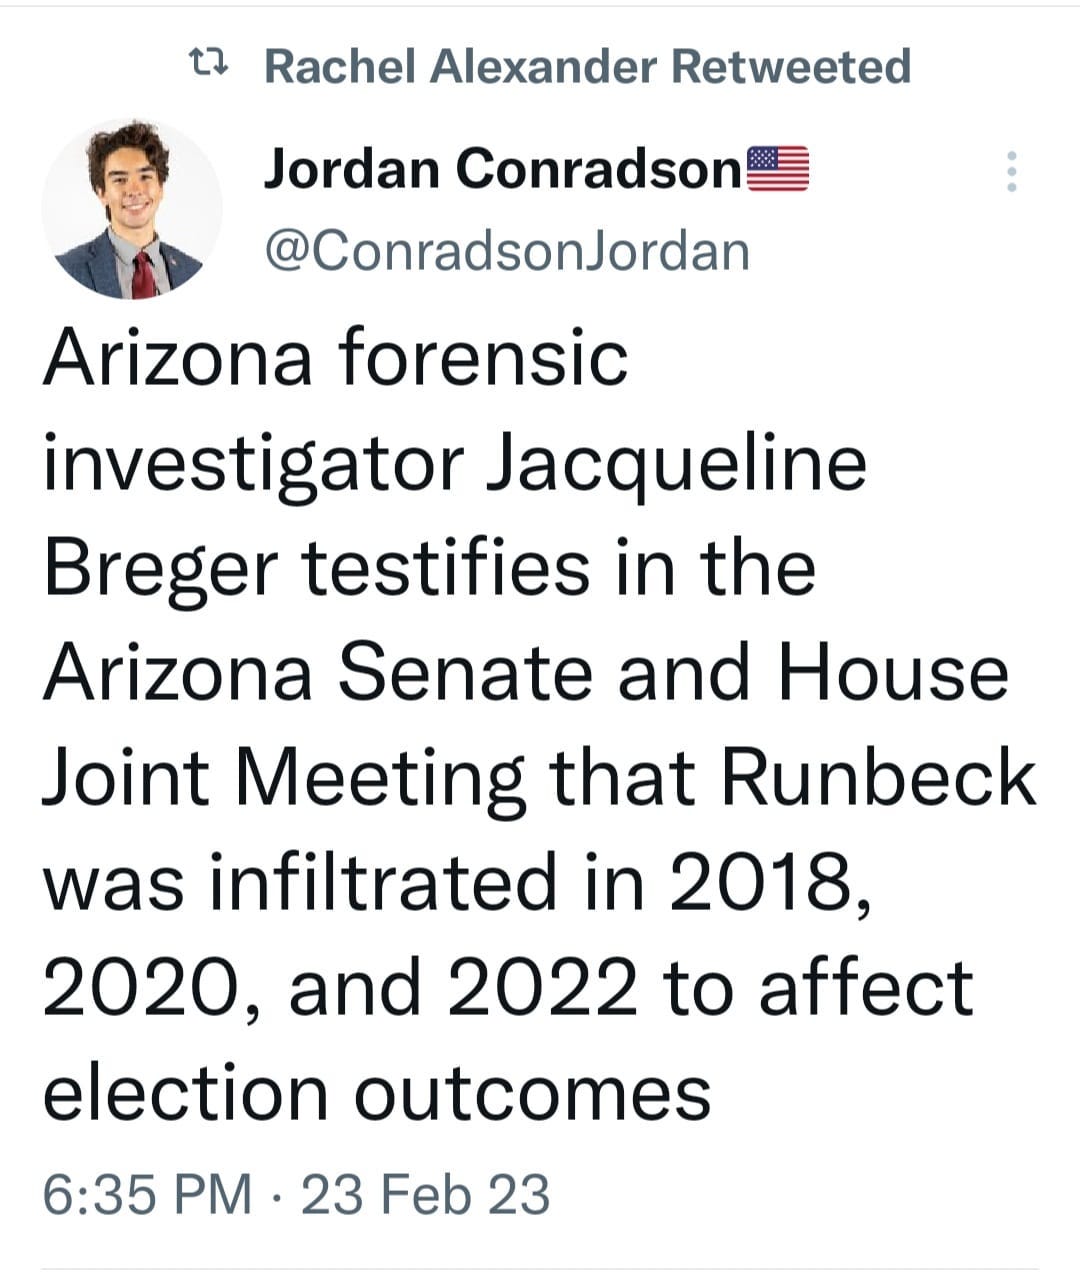 May be an image of 1 person and text that says 't Rachel Alexander Retweeted Jordan Conradson @ConradsonJordan Arizona forensic investigator Jacqueline Breger testifies in the Arizona Senate and House Joint Meeting that Runbeck was infiltrated in 2018, 2020, and 2022 to affect election outcomes 6:35 PM .23 23 Feb 23'